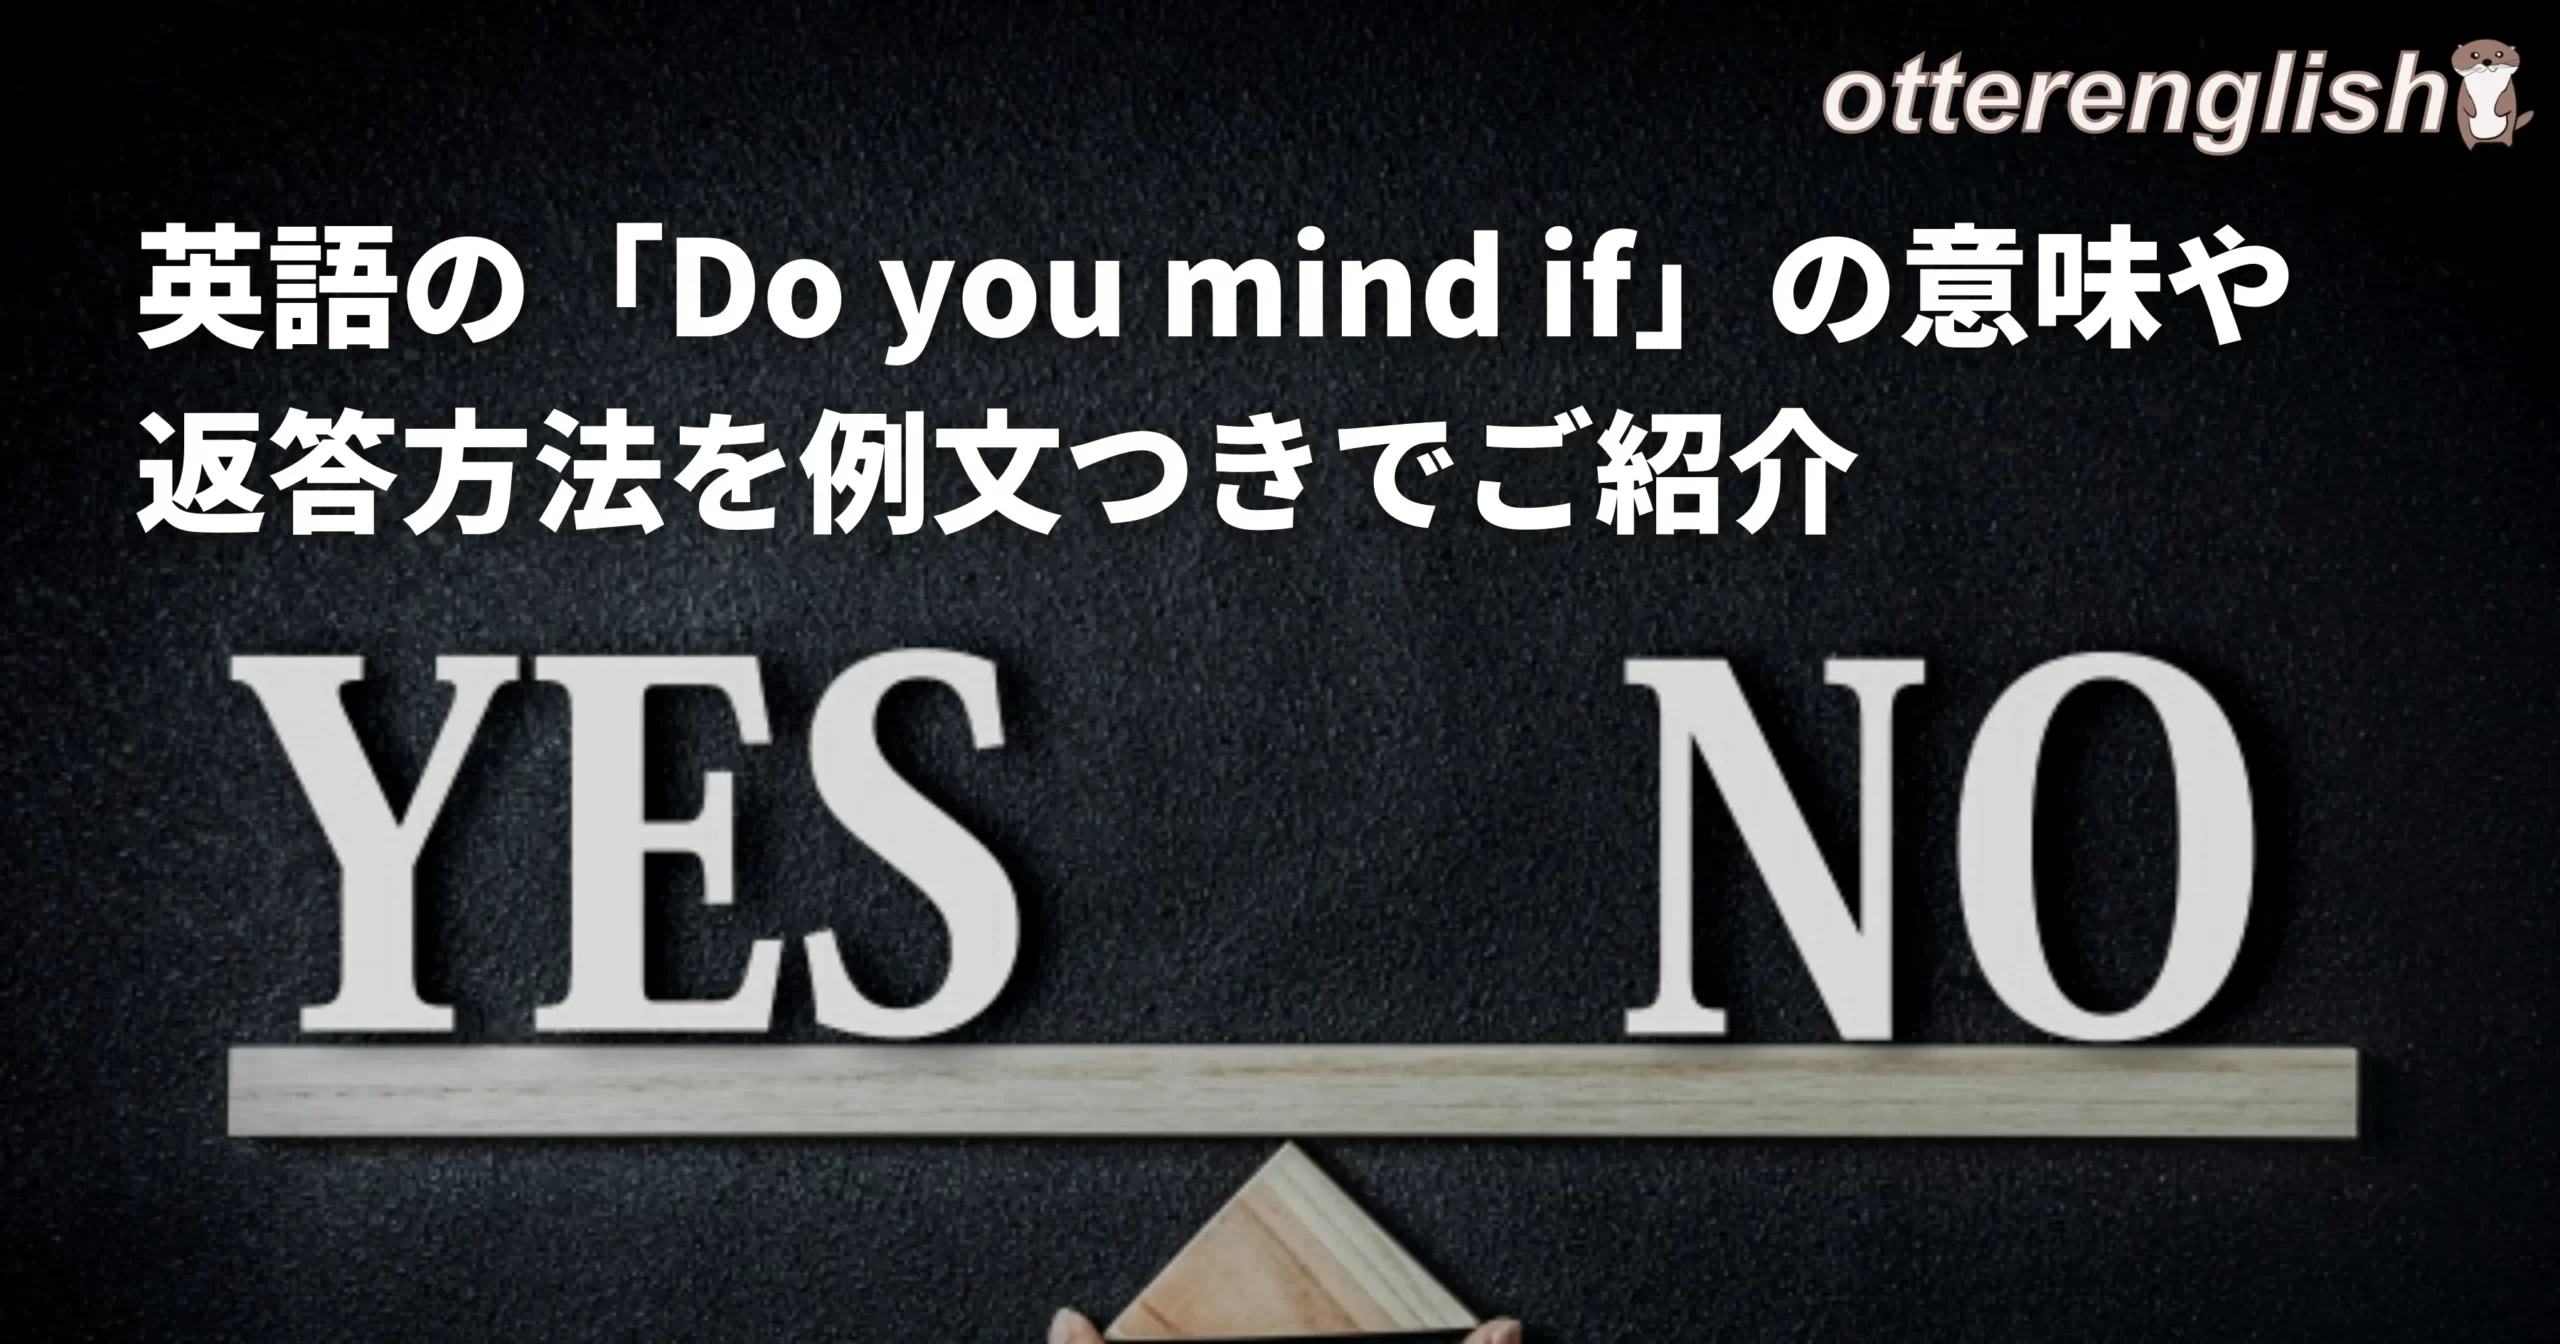 Do you mind ifに対する返答を表した画像